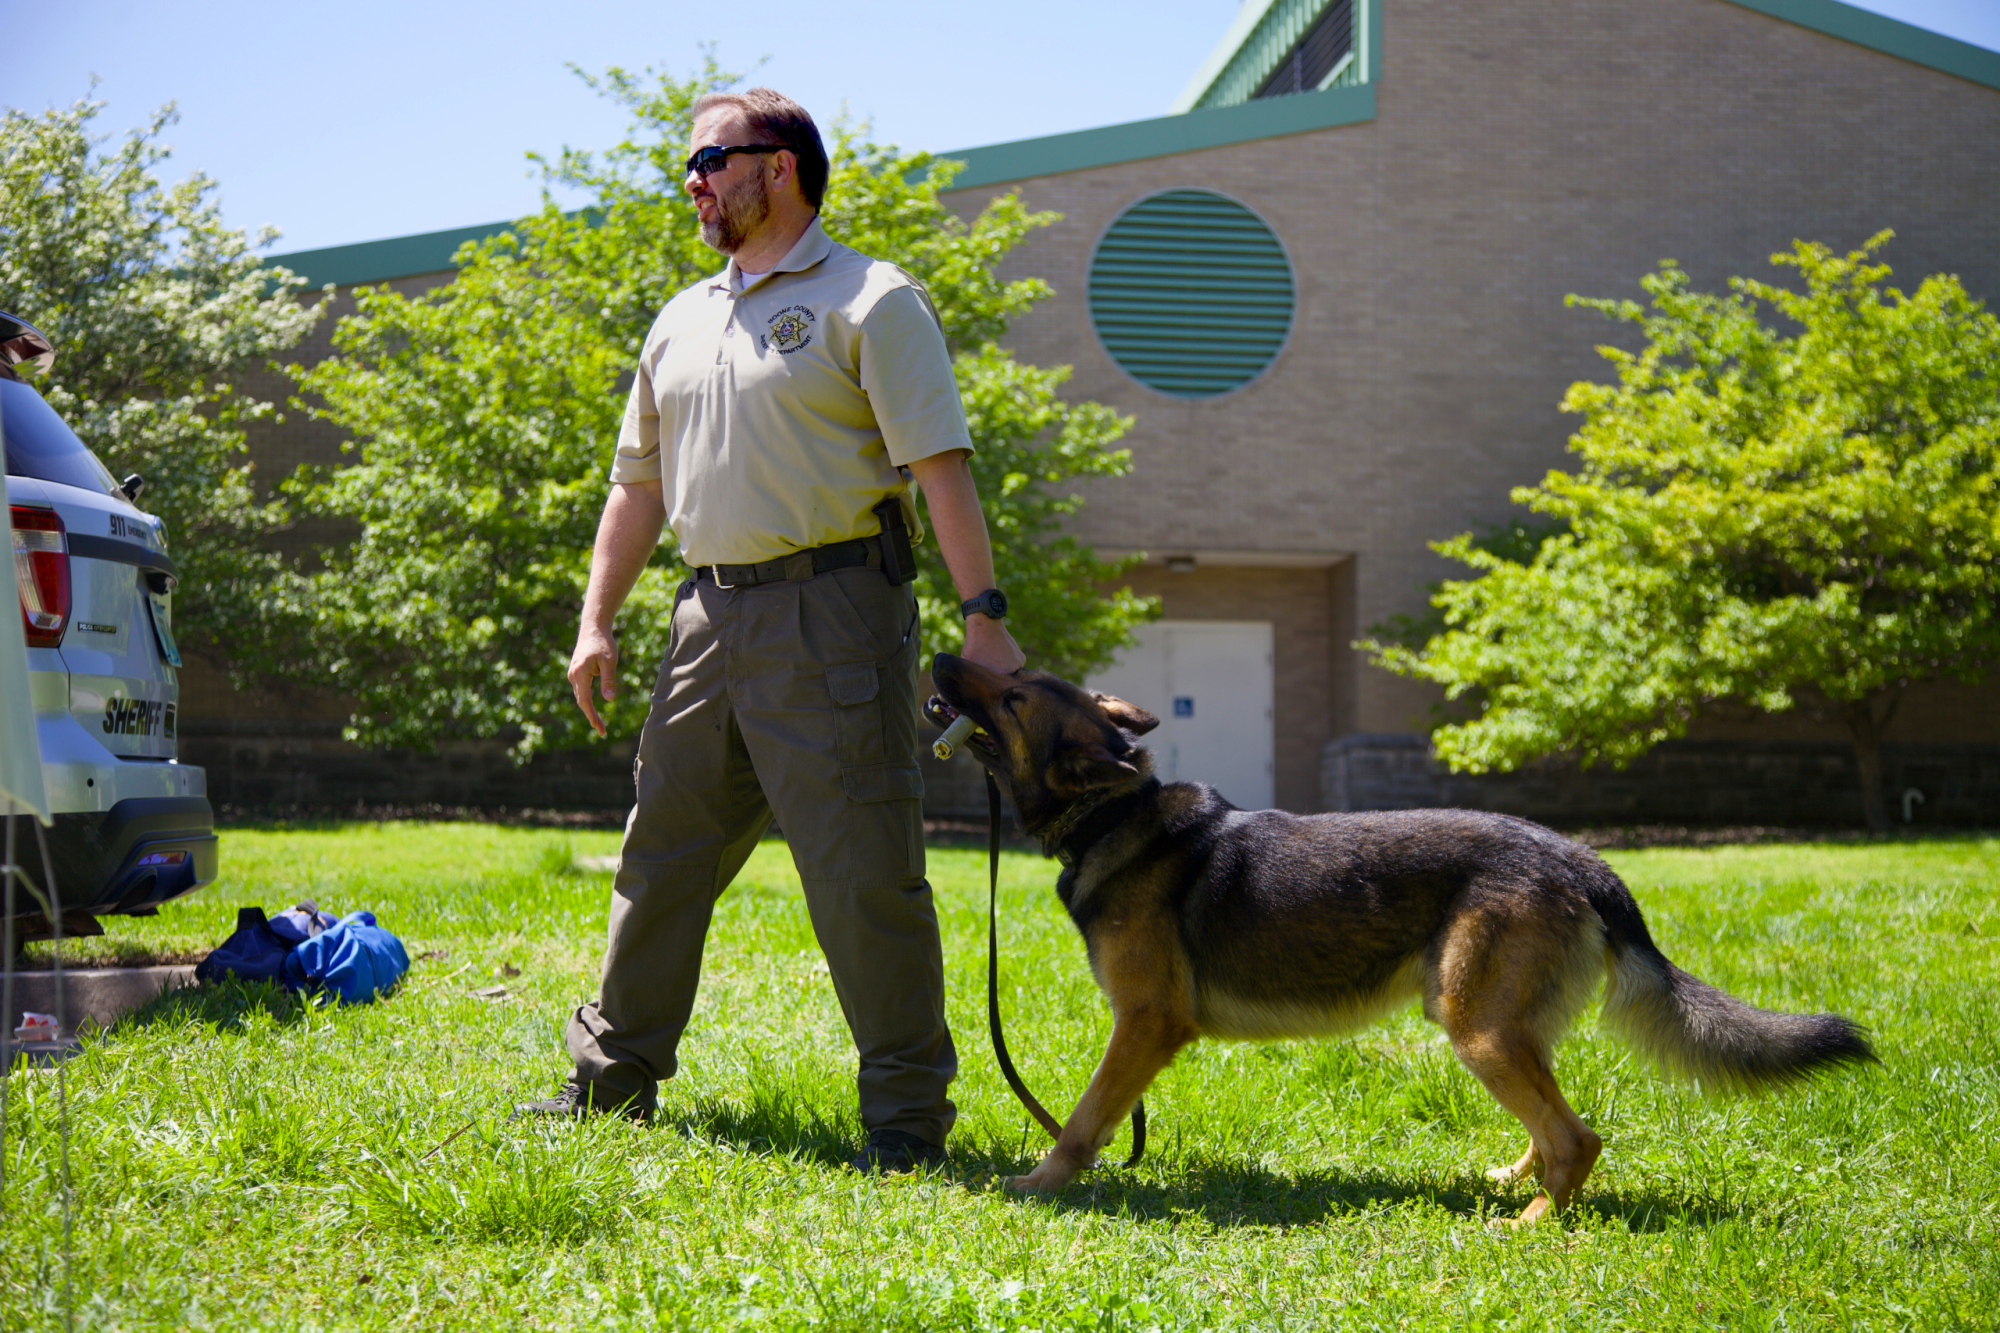 This is an image of someone from the sheriff's department training a dog.